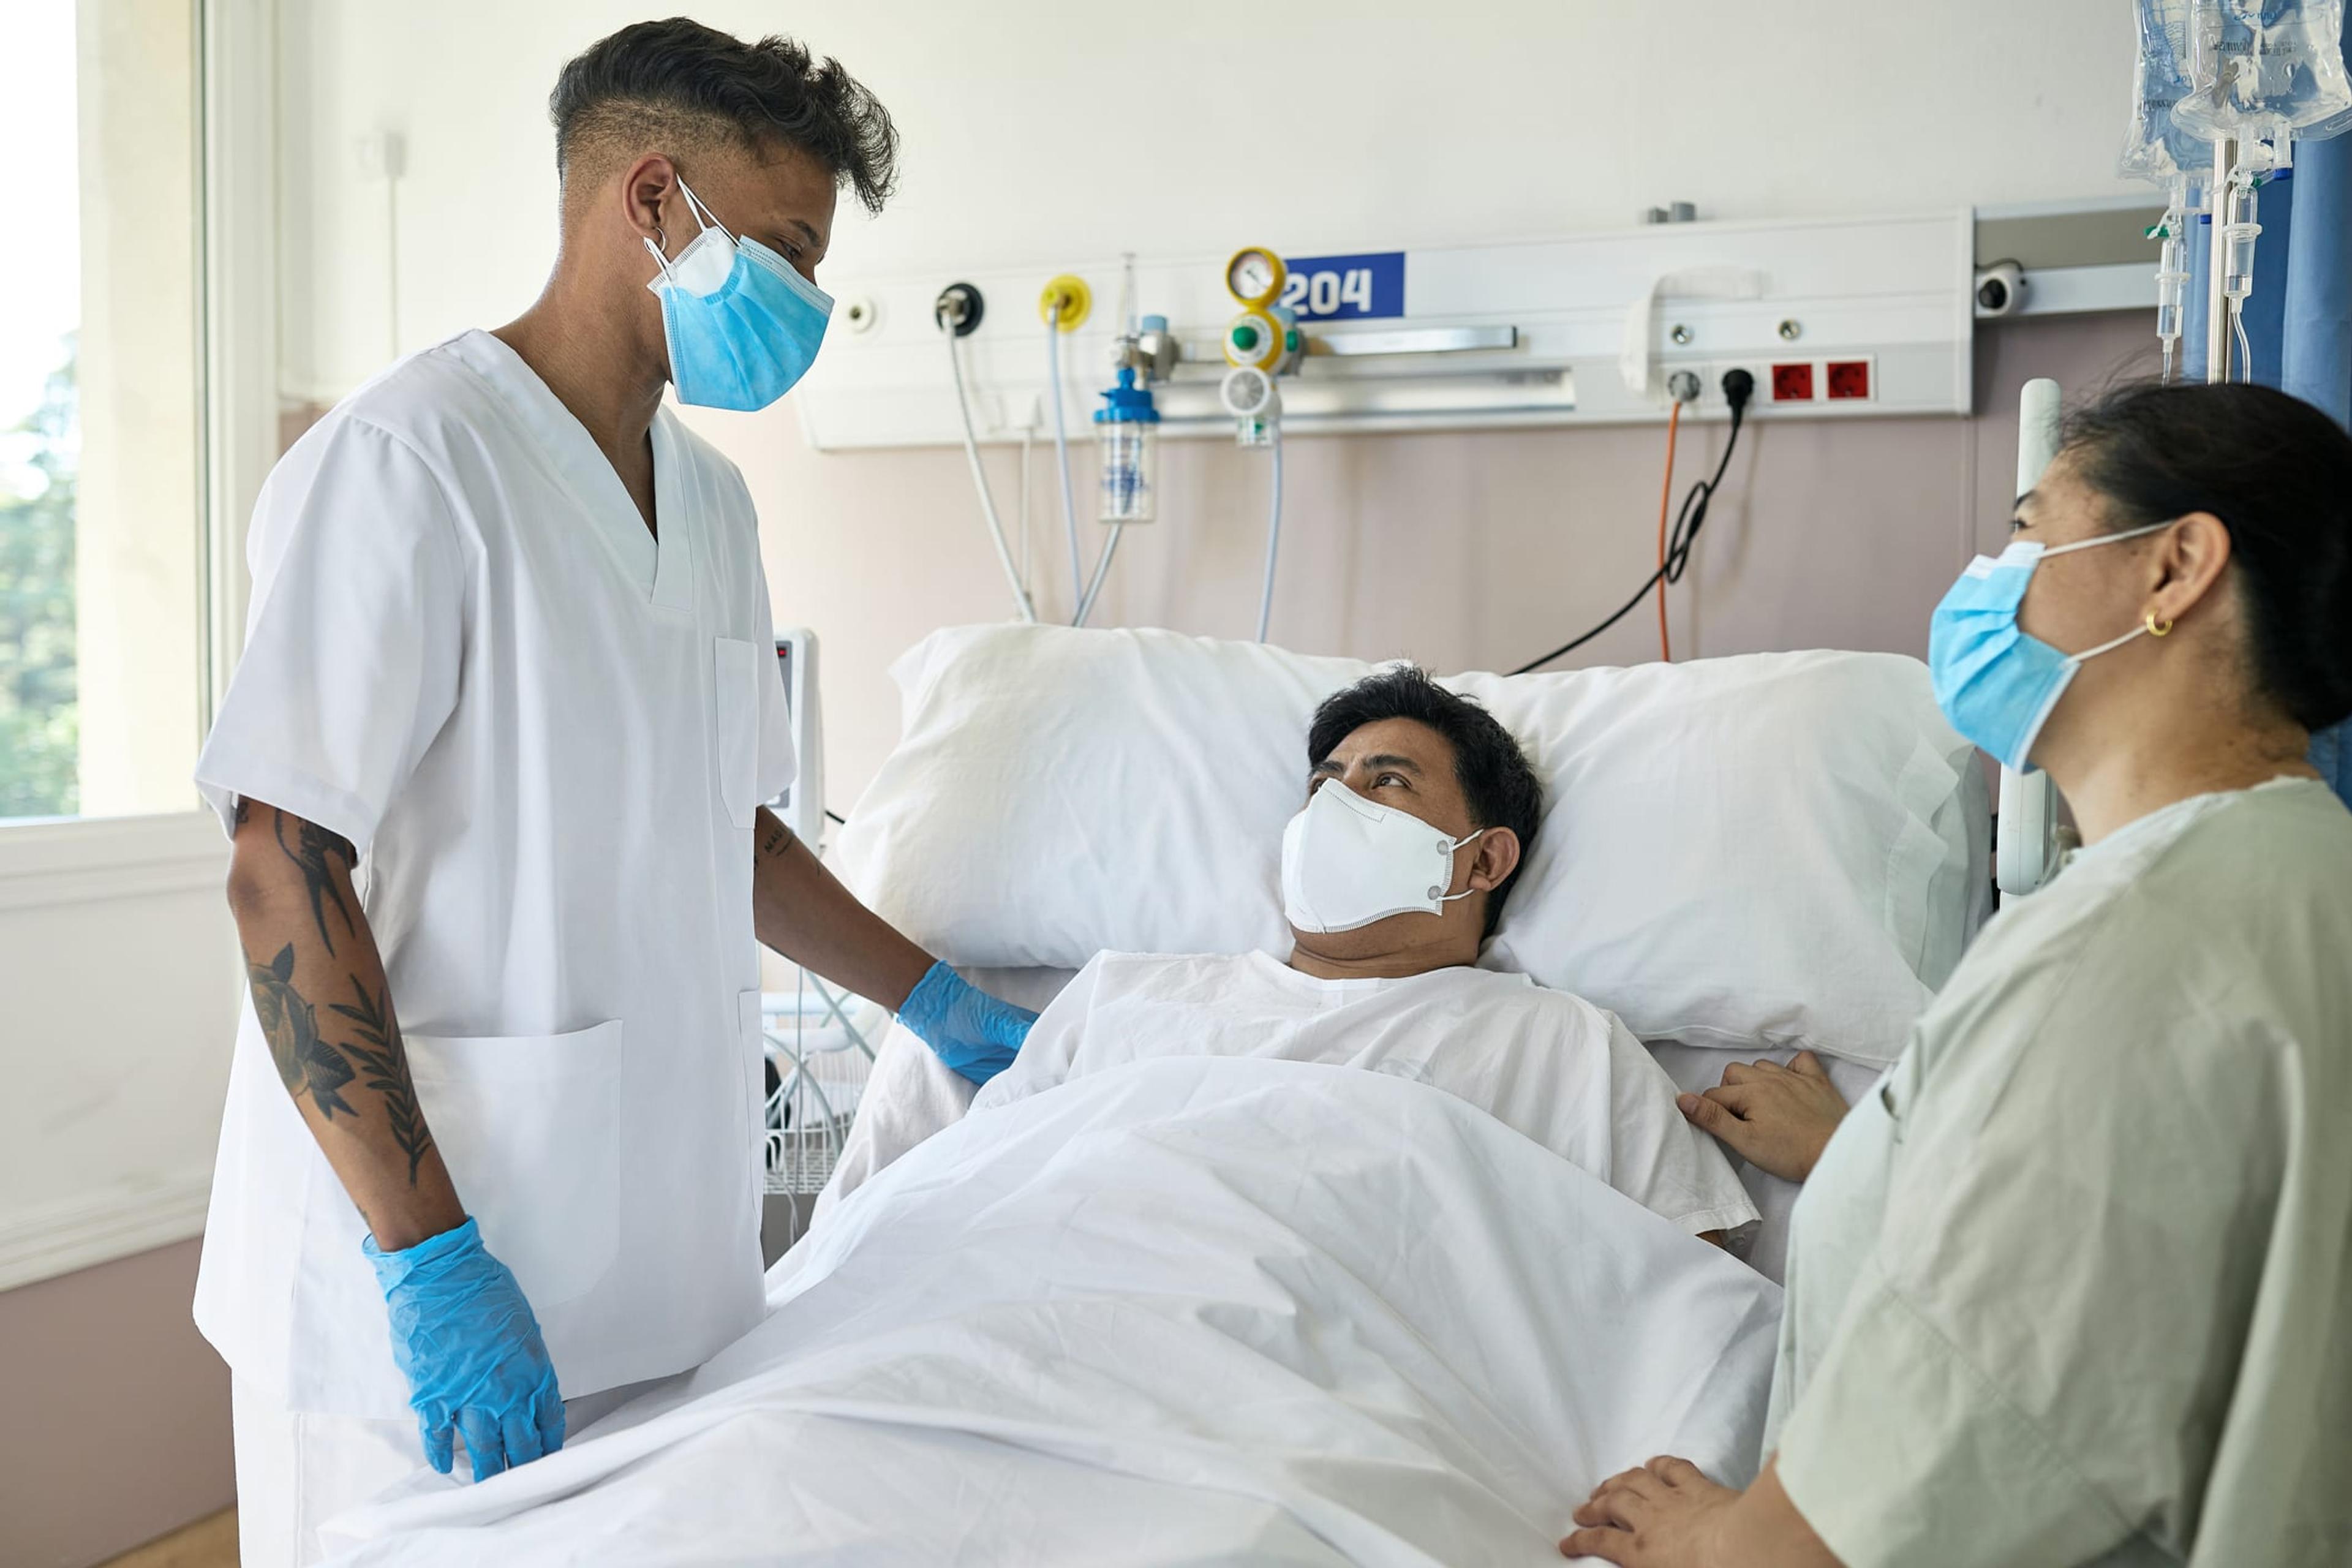 Young Male Nurse at Bedside of Recovering COVID-19 Patient